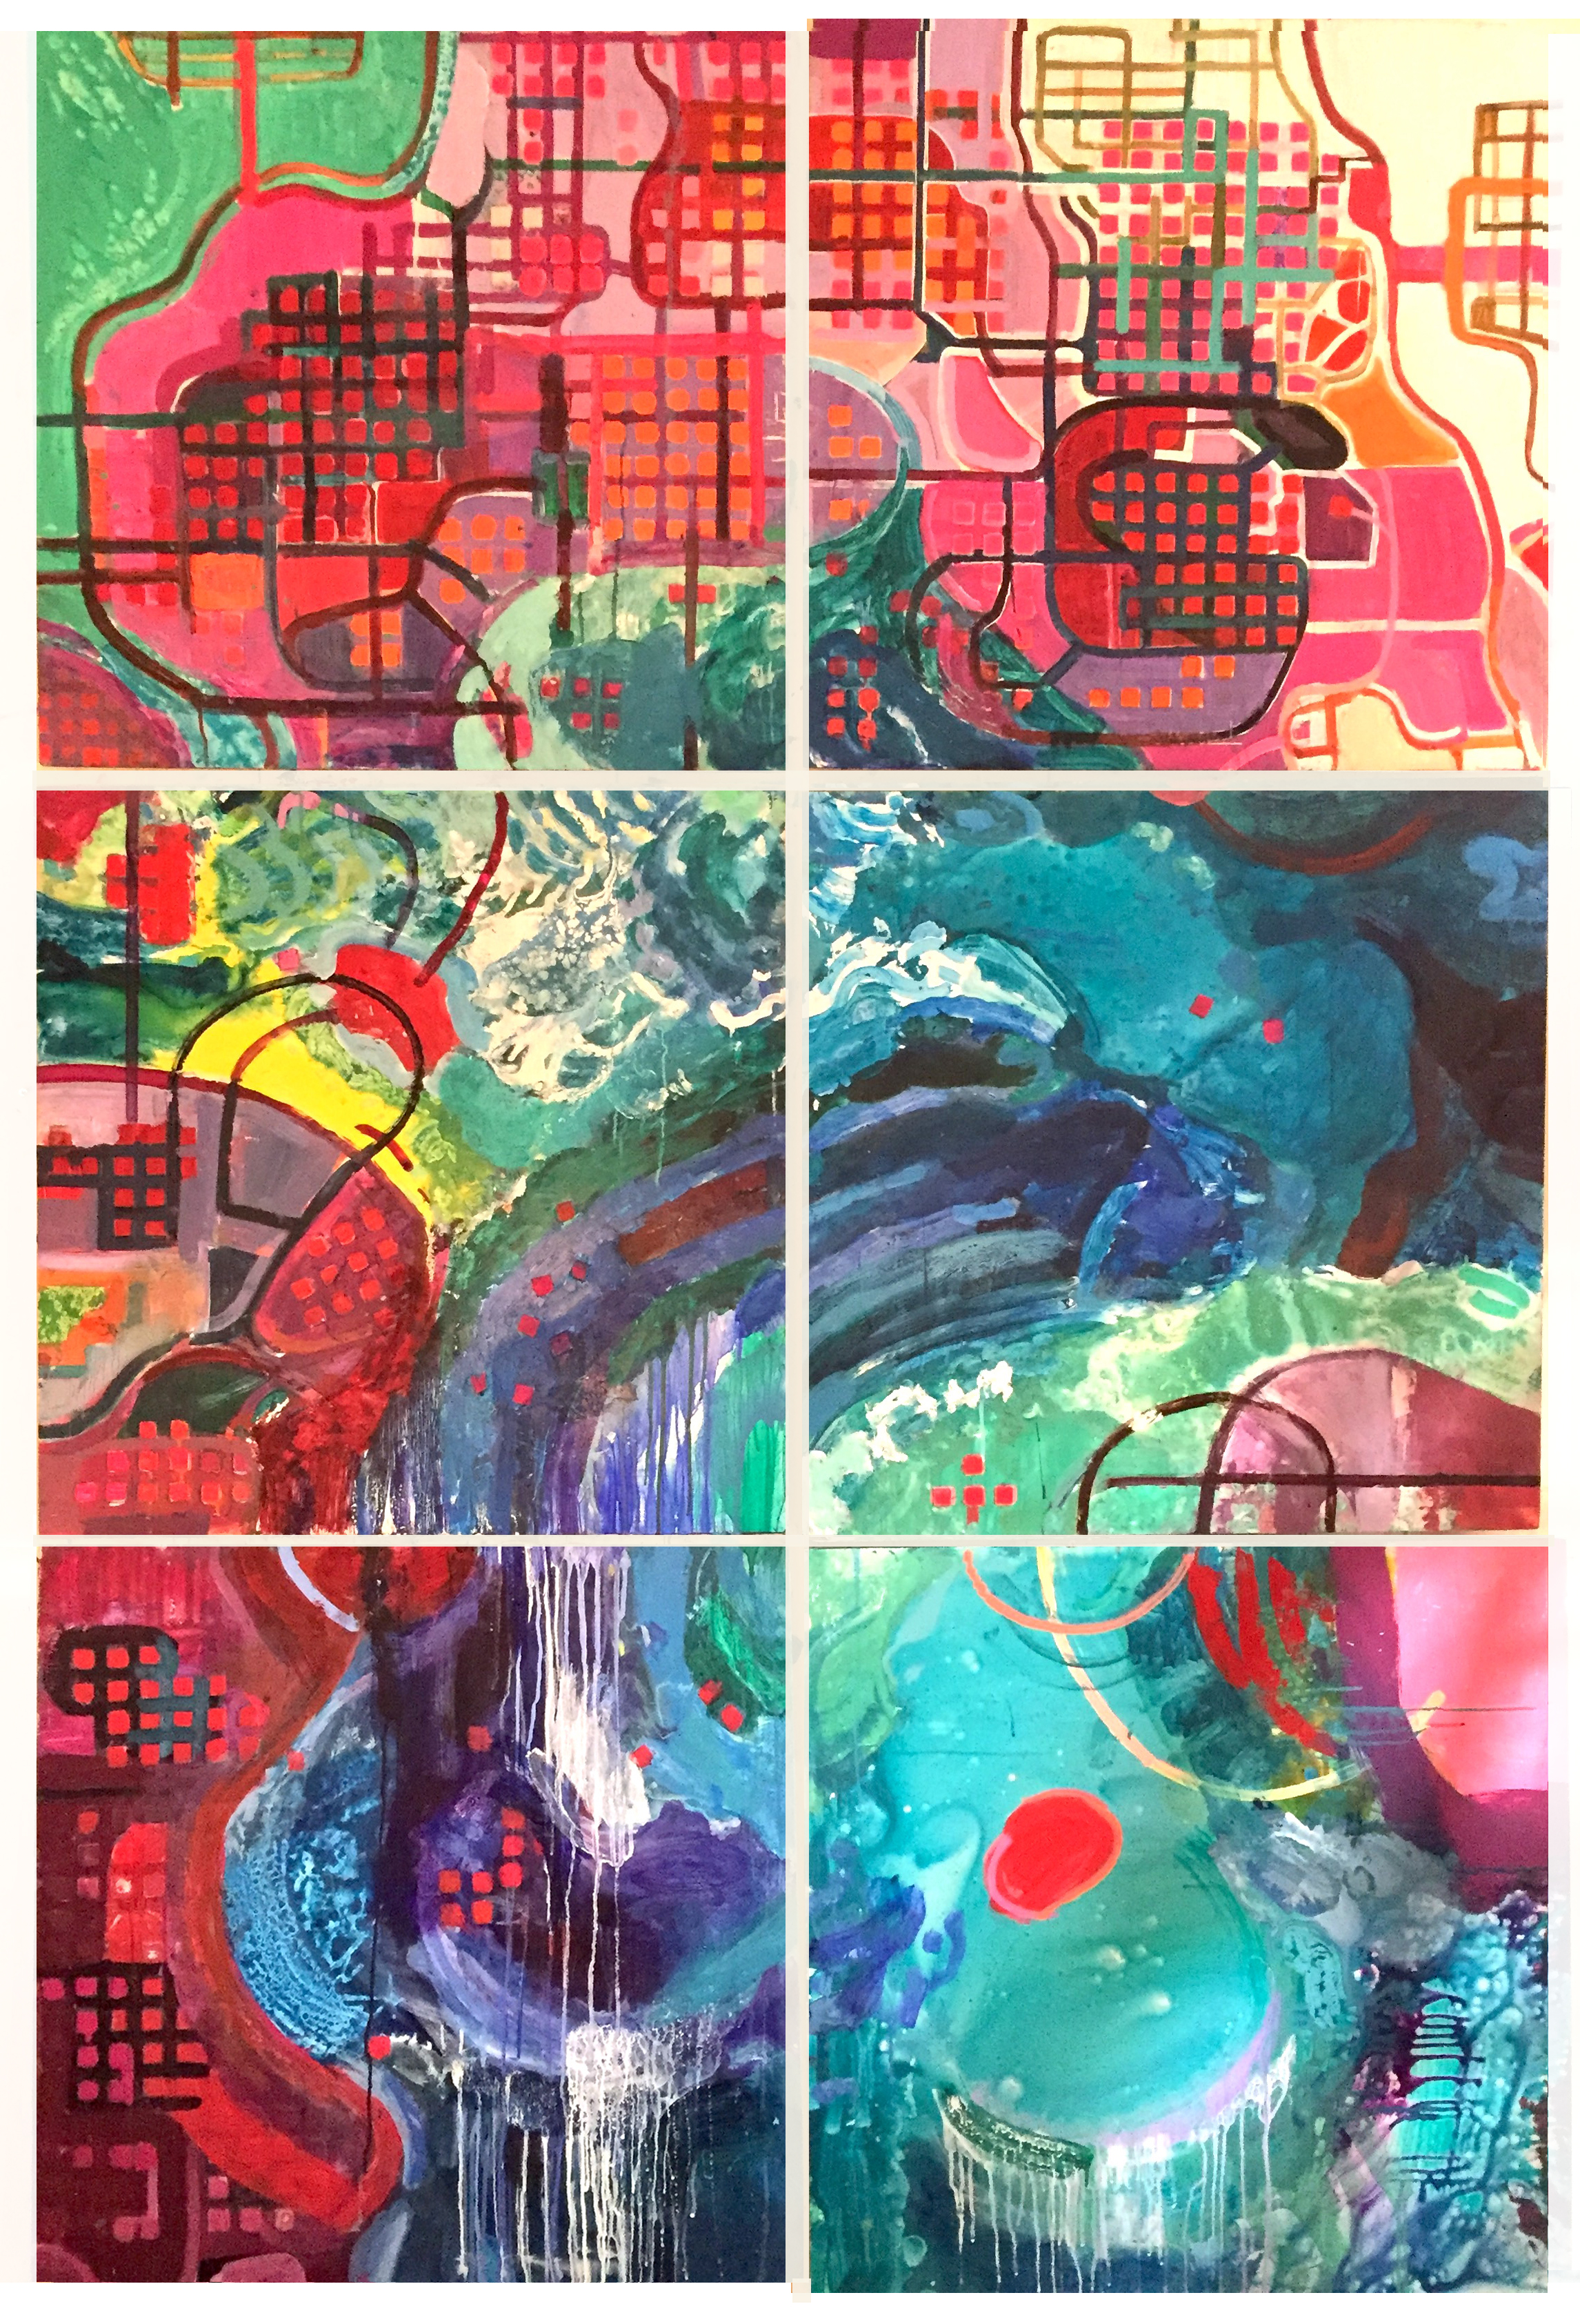 A series of paintings with different colors and shapes.